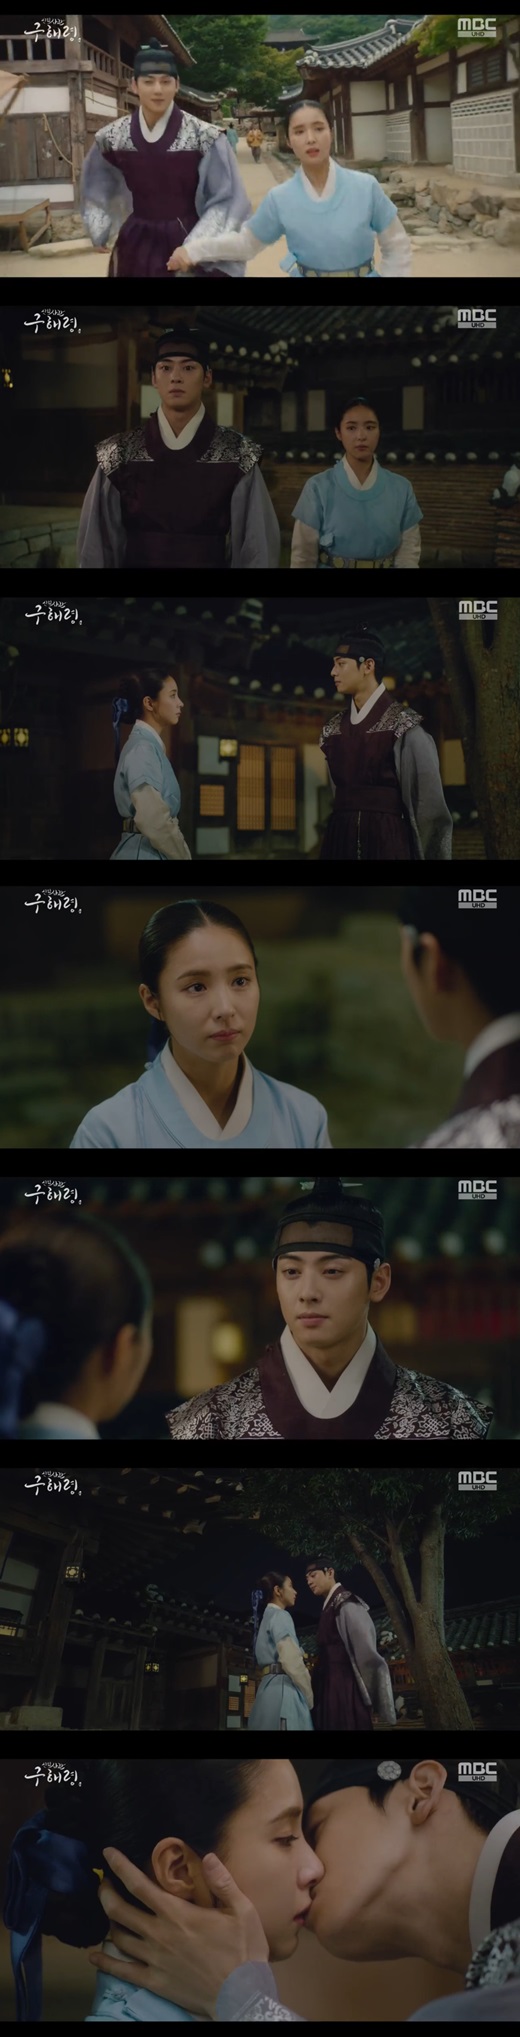 Newcomer Rookie Historian Goo Hae-ryung Cha Eun-woo and Shin Se-kyung shared Kiss.On the 26th, MBC drama The New Entrepreneur Rookie Historian Goo Hae-ryung (played by Kim Ho-soo, directed by Kang Il-soo Han Hyun-hee) was reunited by Rookie Historian Goo Hae-ryung and Lee Rim (Cha Eun-woo).Rookie Historian Goo Hae-ryung entered the greenery hall where Lee Lim was trapped.Rookie Historian Goo Hae-ryung and Irim, who met again there, looked at each other with fond eyes; afterward they both took their hands and walked out of the palace.Rookie Historian Goo Hae-ryung took Leerim to the site of the mother painting (Jeon Ik-ryeong).Mohwa told Irim, I am going to finish everything at a banquet to be held a few days later. I kept my mind to protect Mama.If you do not return to Shinshi that day, leave here. Irim went out to sleep and thought: Rookie Historian Goo Hae-ryung went to such Irim and asked, What do you think?I was thinking about what would happen after tomorrow, so dont move in case you dont know, there should be a place to write, Irim said.Rookie Historian Goo Hae-ryung said: You dont have to do that, wherever Mama is, Ill be with her, and now Ive left the palace and met people to be with.I can not live like that without being alone again and resting comfortably. I will be with Mama. But Irim said, No. Youll live your life. I realized when I saw you standing in the yard the day you left.My whole life was a time to wait for you to come to me. So its okay.I can change my name and live here and there, but if I think that I am waiting for the day to meet you someday, I can endure it. Rookie Historian Goo Hae-ryung wept when he heard Irim.Irim approached Rookie Historian Goo Hae-ryung and kissed him, wiping away tears.